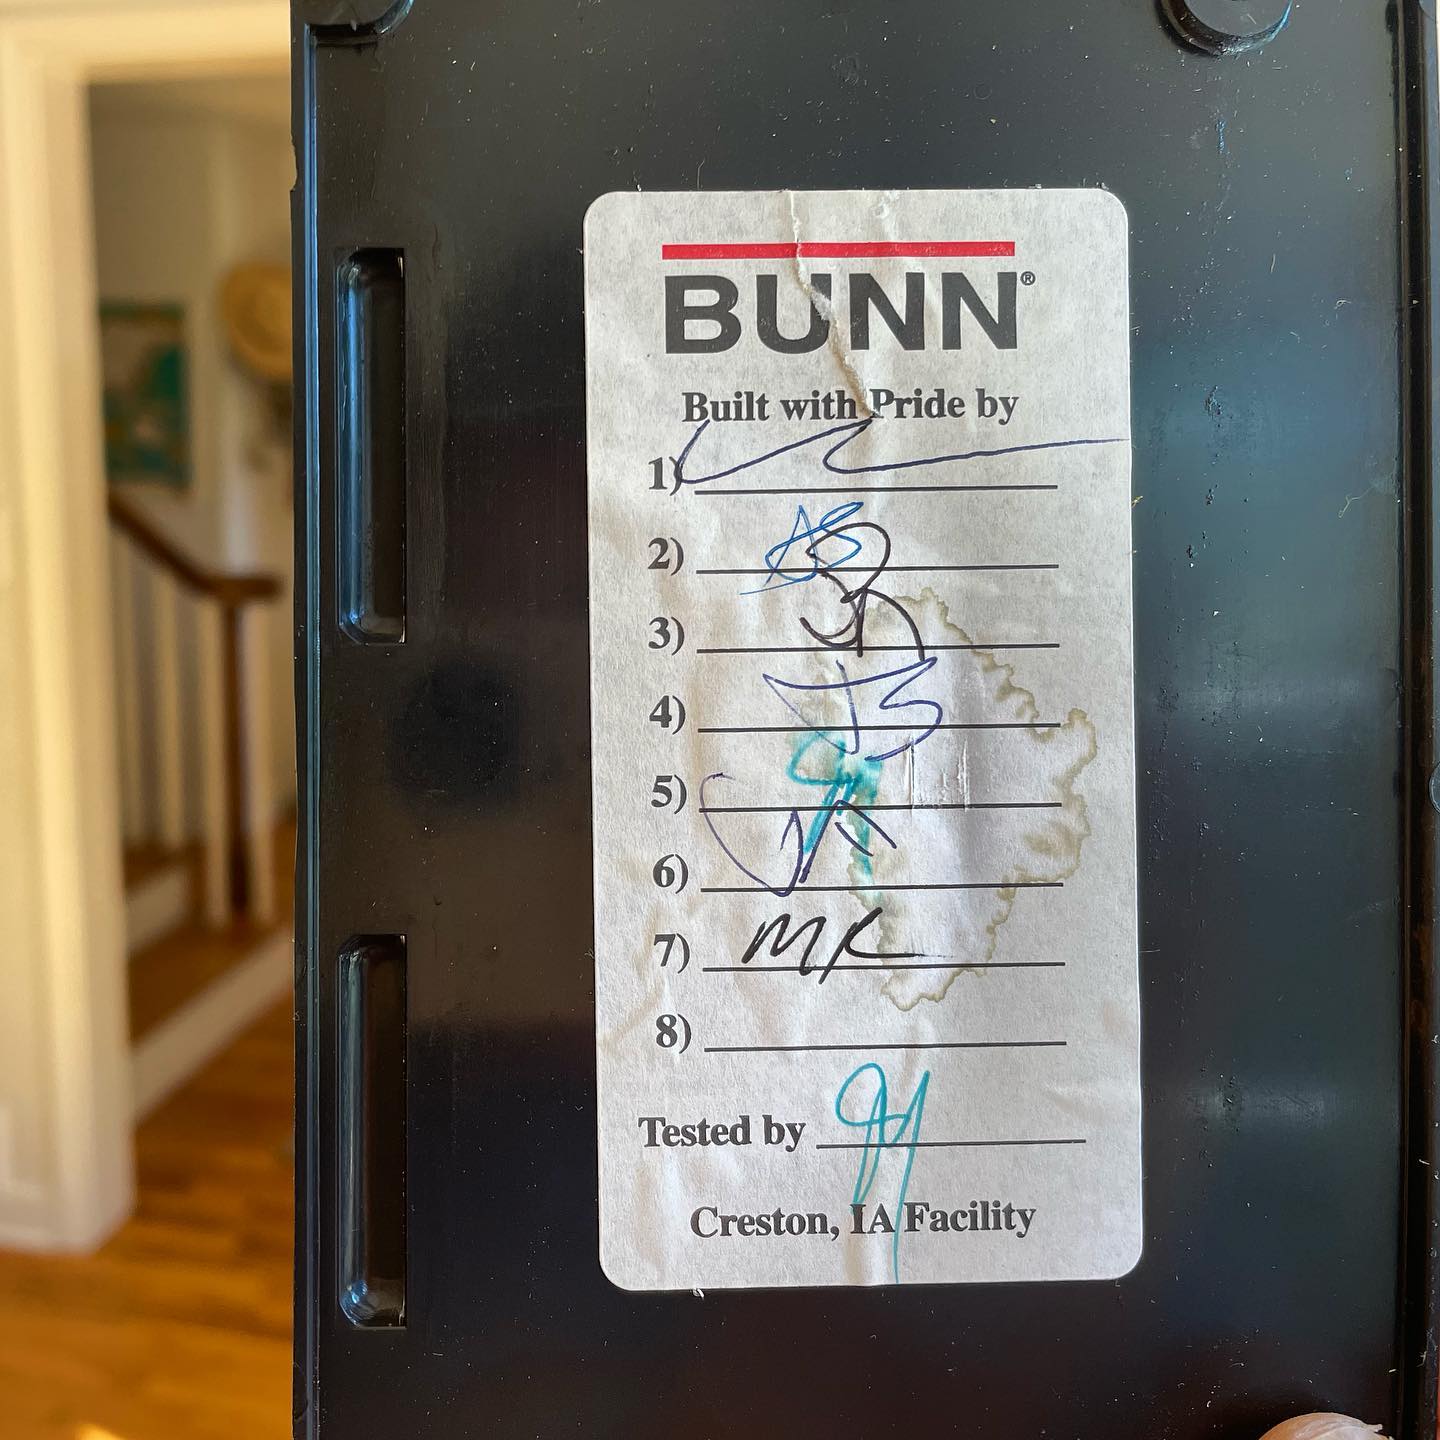 Repairing my BUNN coffee brewer and discovered this personal touch. ️